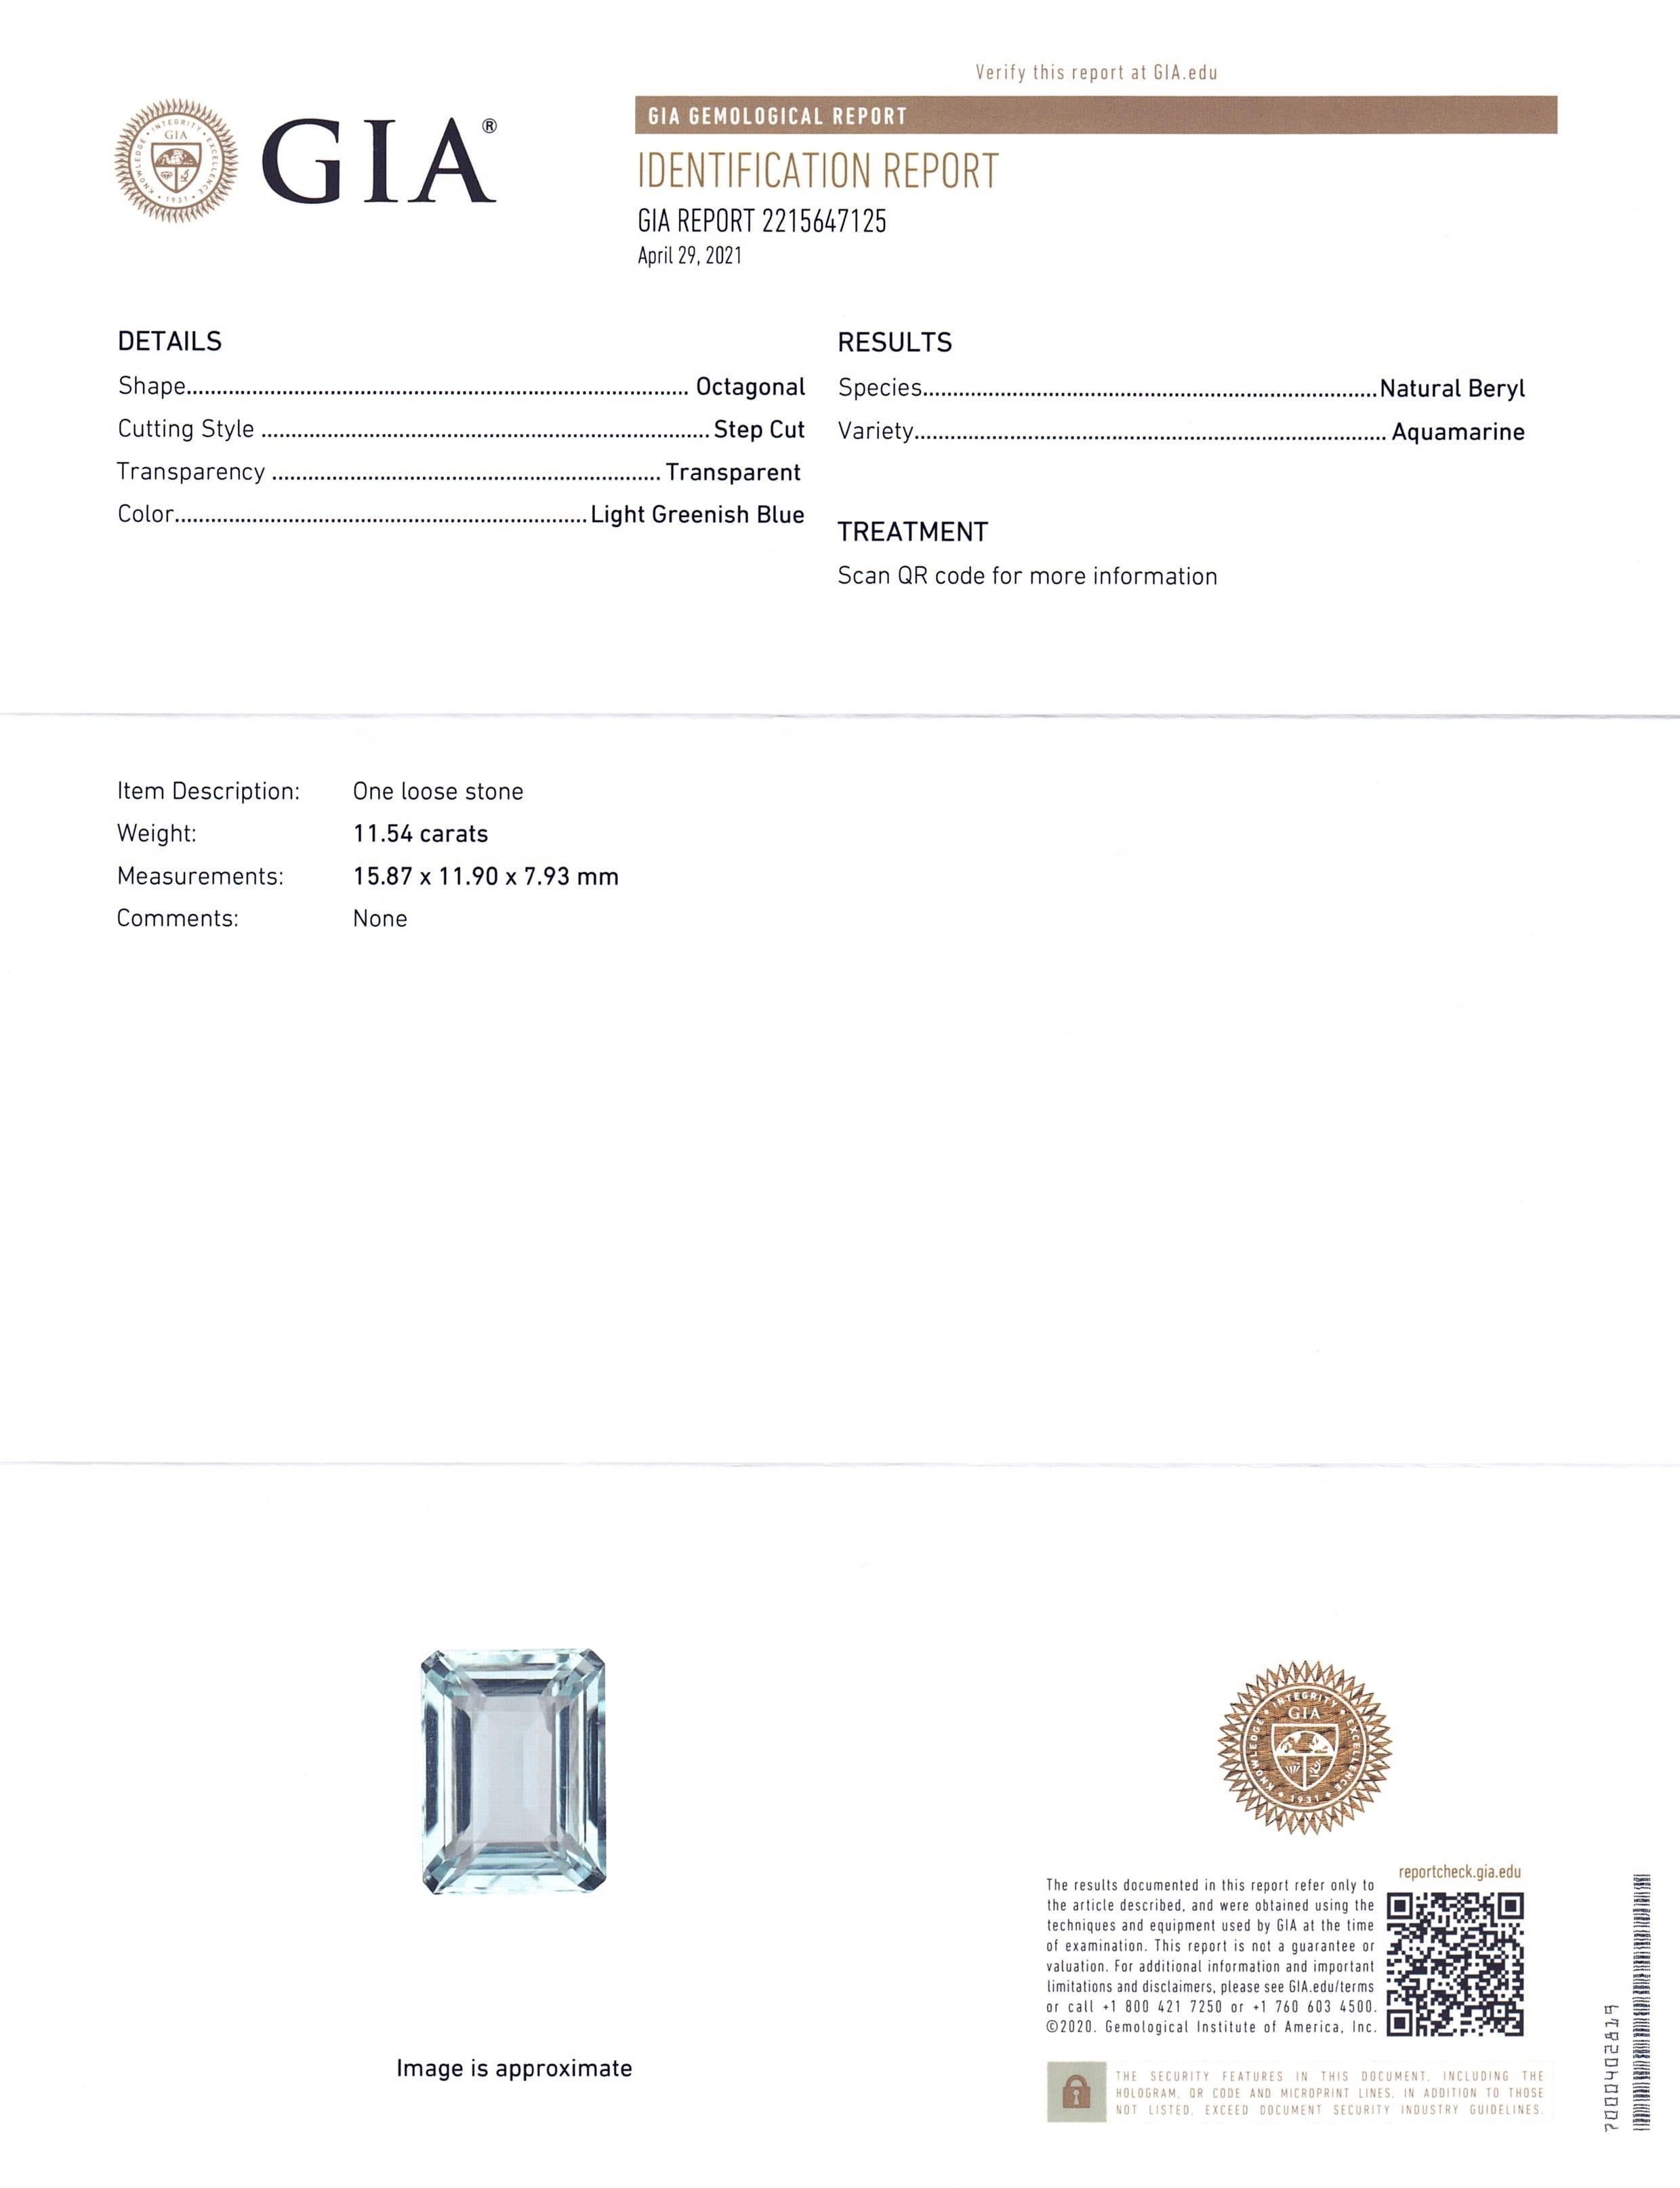  This is a stunning GIA Certified Aquamarine

 

The GIA report reads as follows:

GIA Report Number: 2215647125
Shape: Octagonal
Cutting Style: Step Cut
Cutting Style: Crown:
Cutting Style: Pavilion:
Transparency: Transparent
Color: Light Greenish